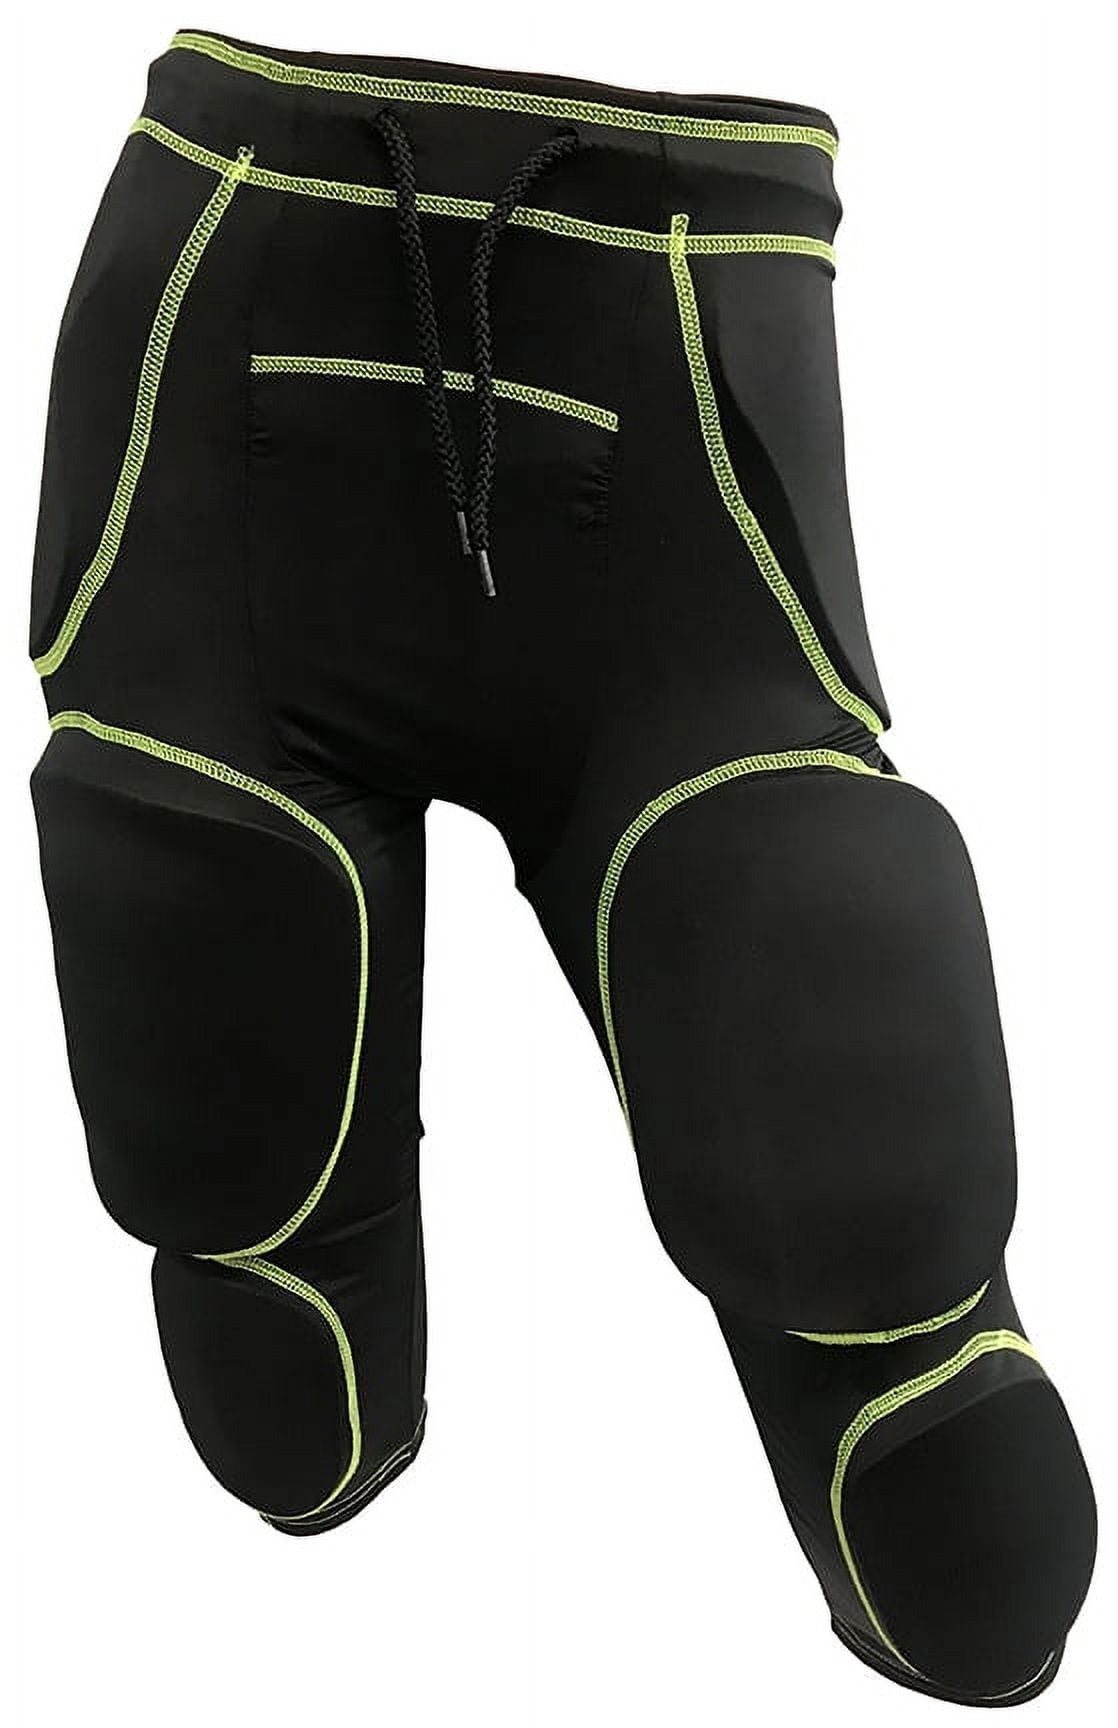 Exxact Sports Battle 7-Pad Football Girdle for Men - Finest Padded